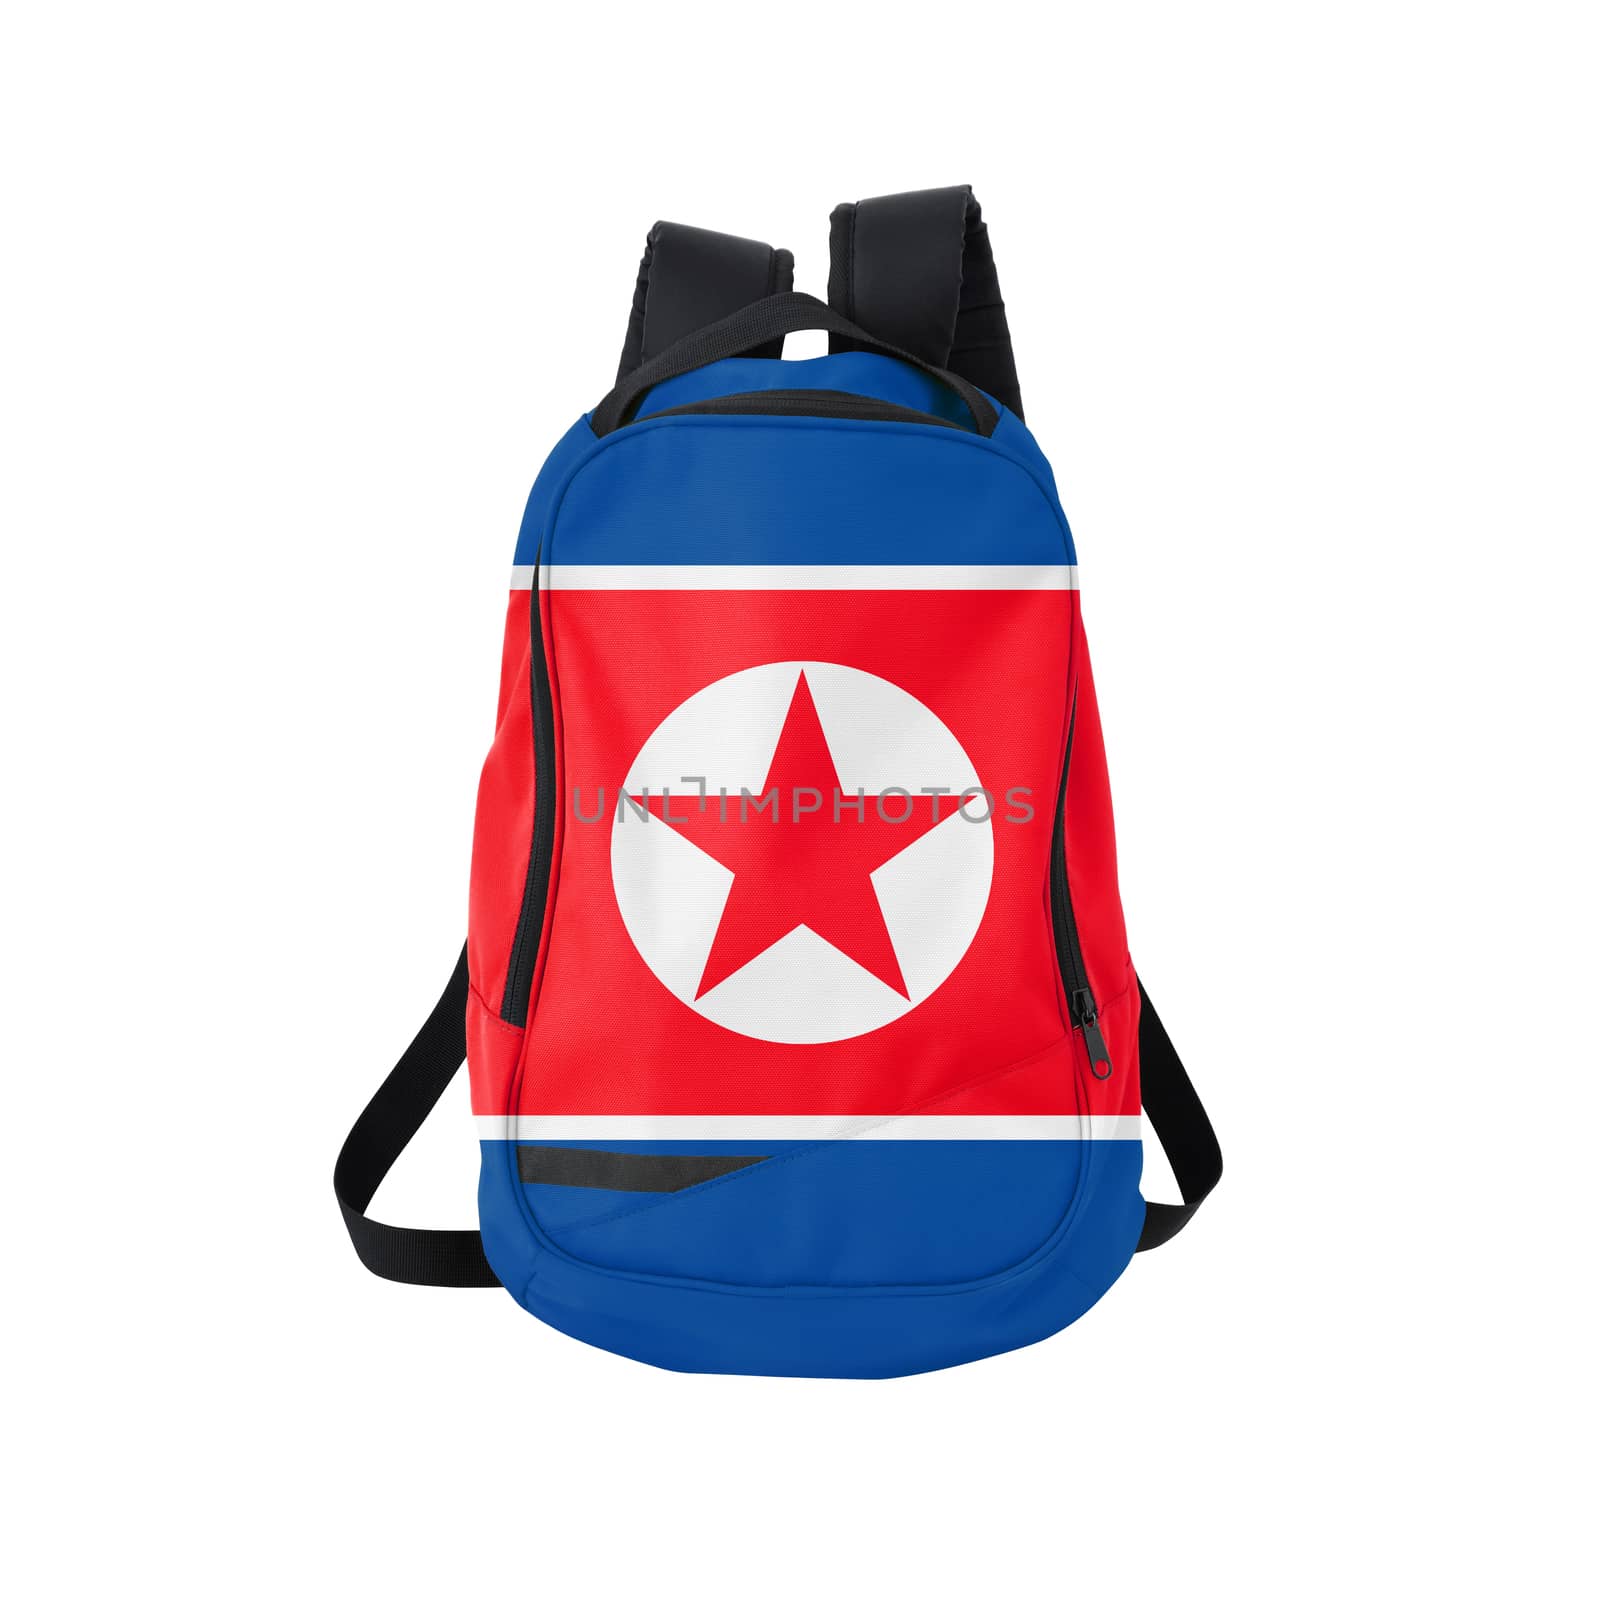 North Korea flag backpack isolated on white background. Back to school concept. Education and study abroad. Travel and tourism in North Korea